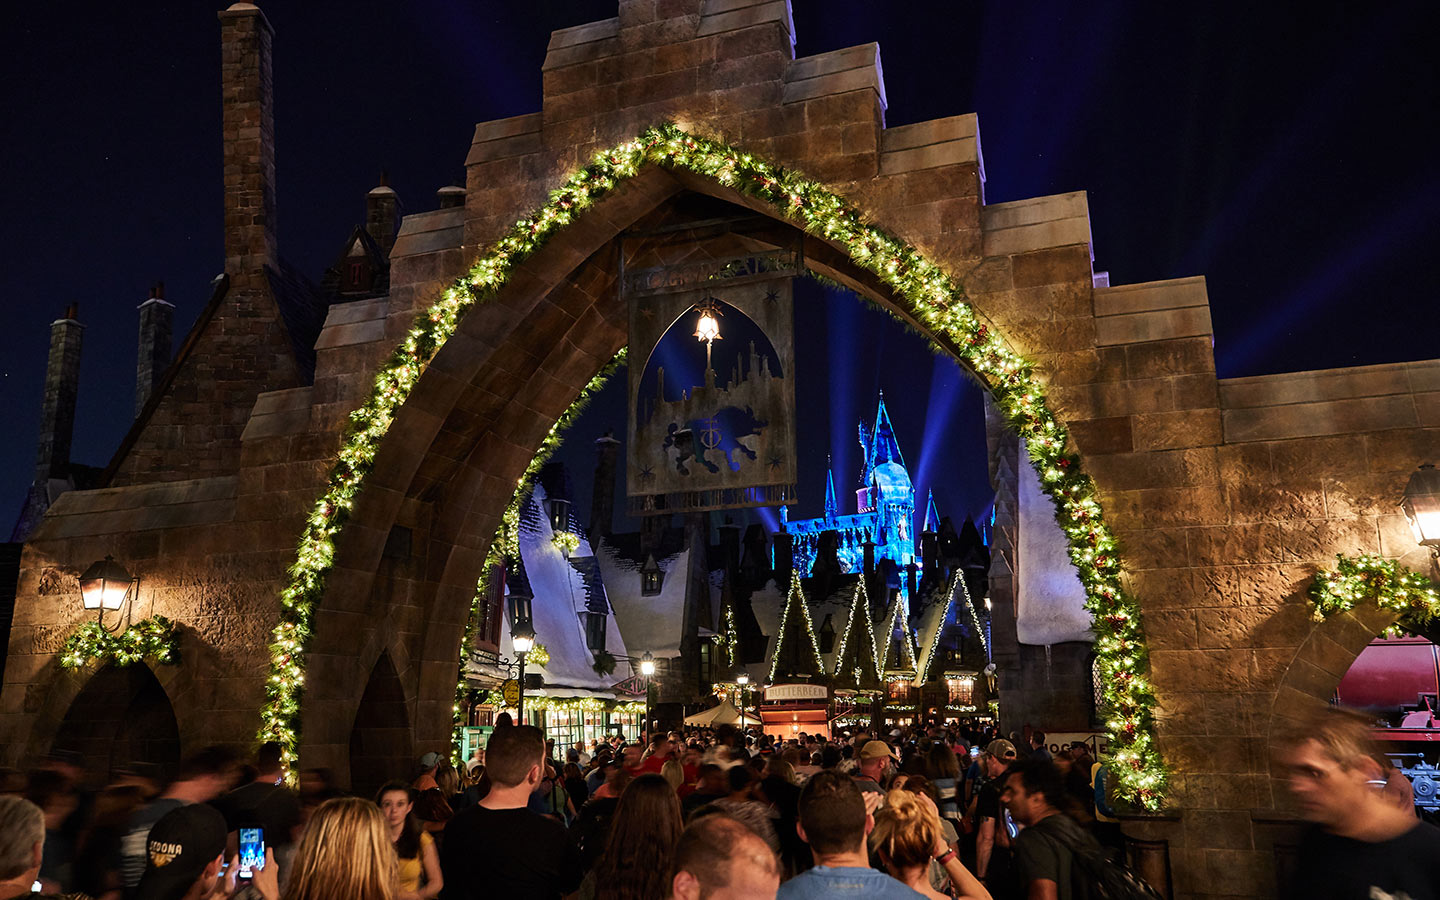 An Insider's Guide: 6 Tips for Your Universal Studios Vacation